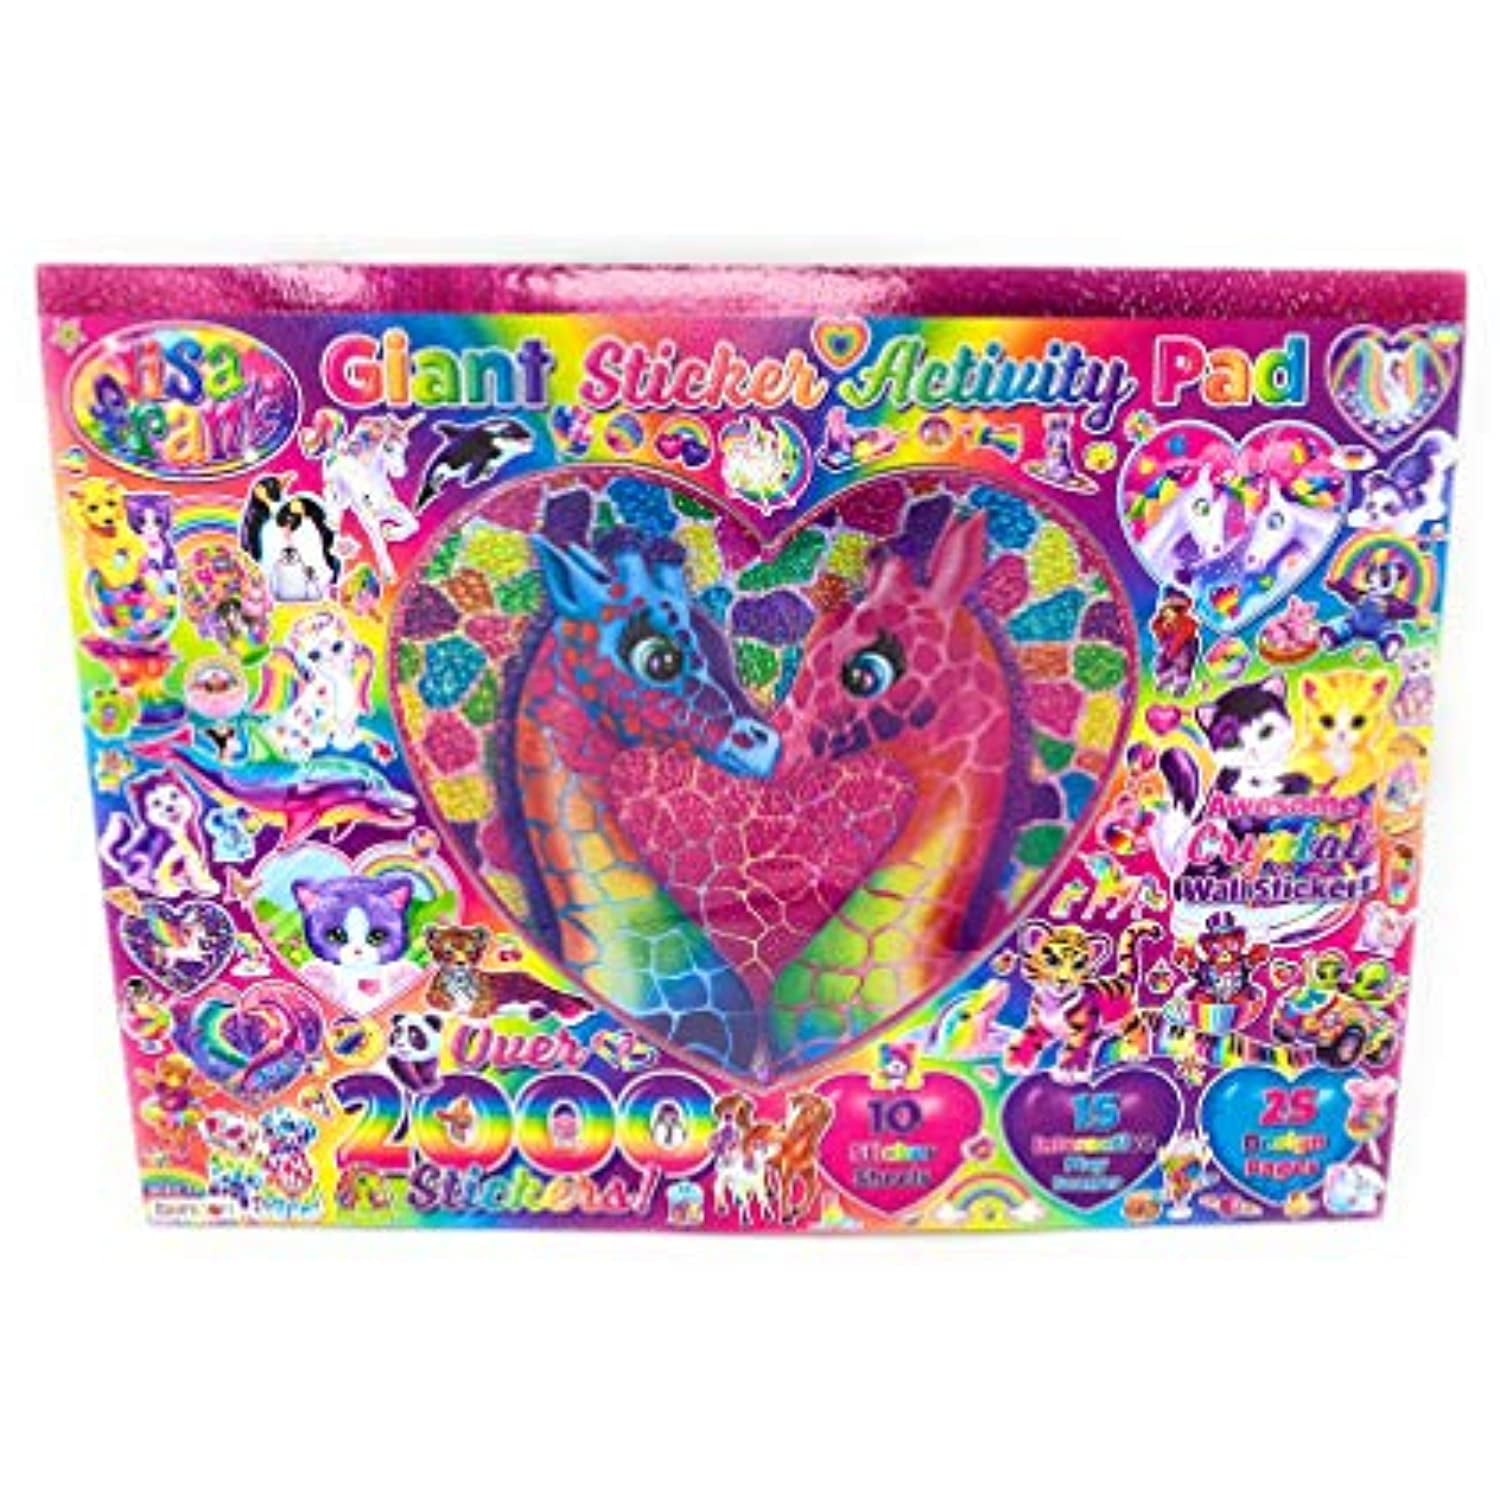 Lisa Frank Giant Sticker Activity Pad 2000+ Stickers, 10 Sticker Sheets, 15 Interactive Play Scenes, 25 Design Pages (Deluxe Set)